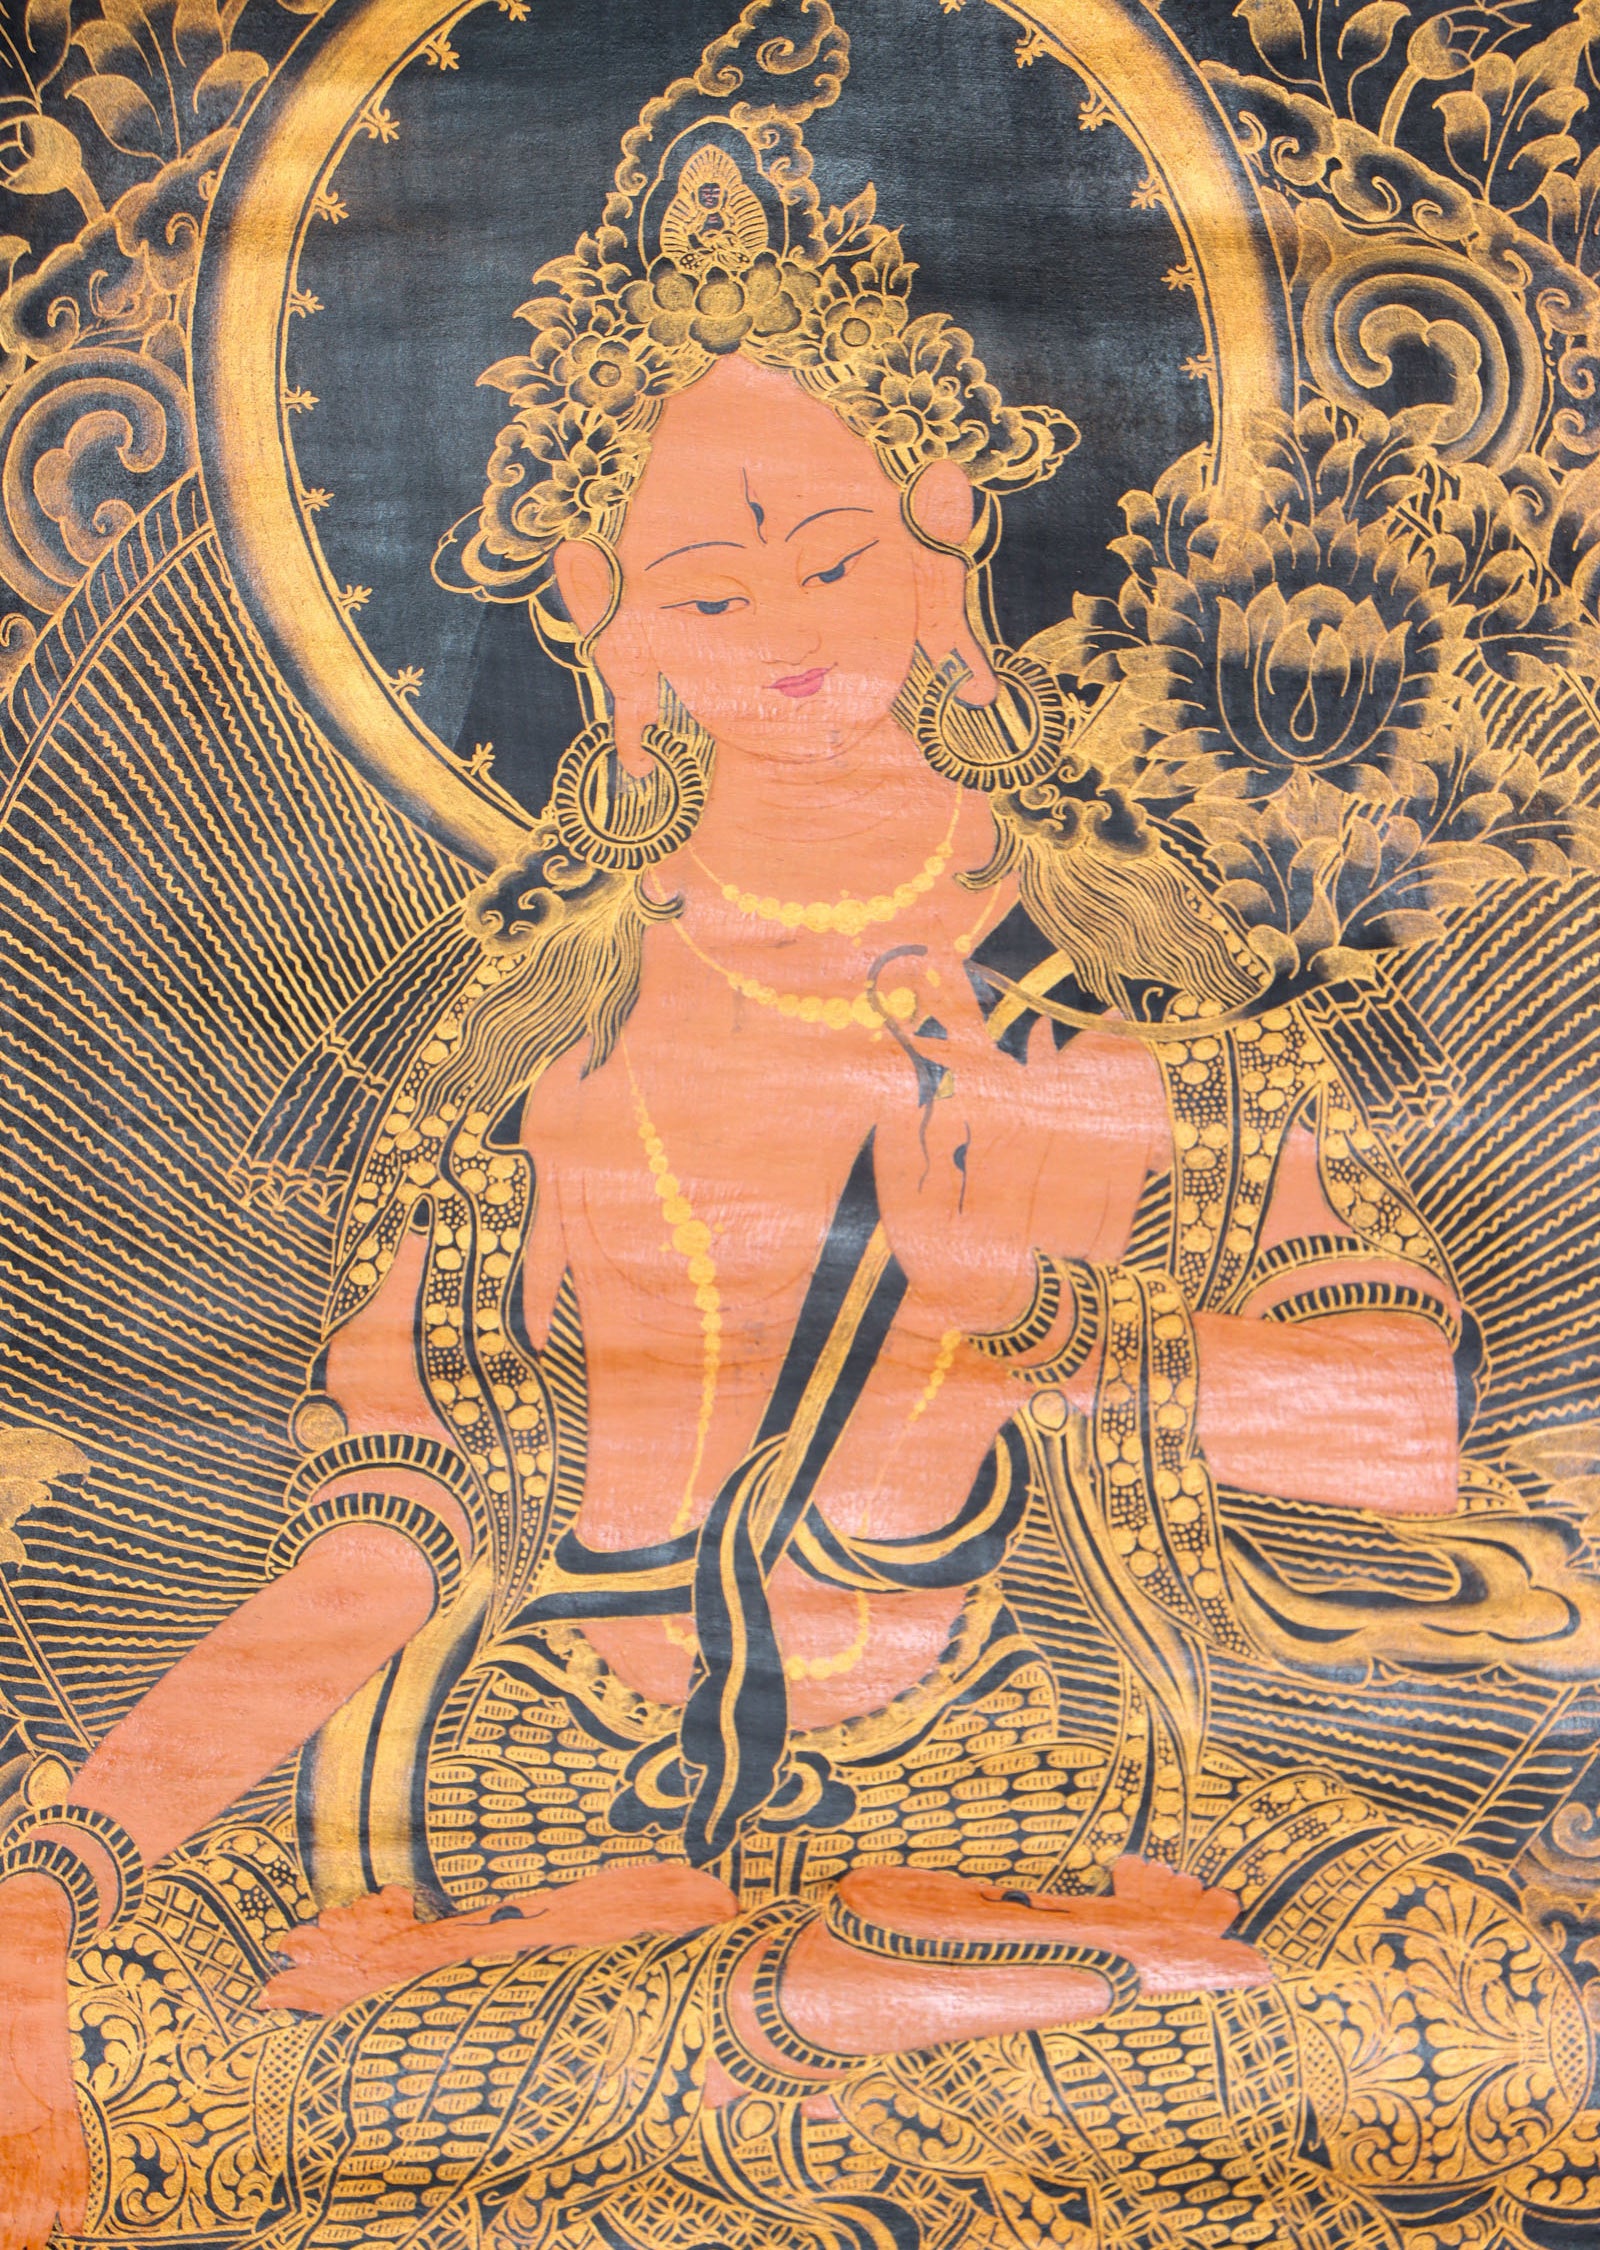 White Tara Antique Thangka Painting for compassion and longetivity.